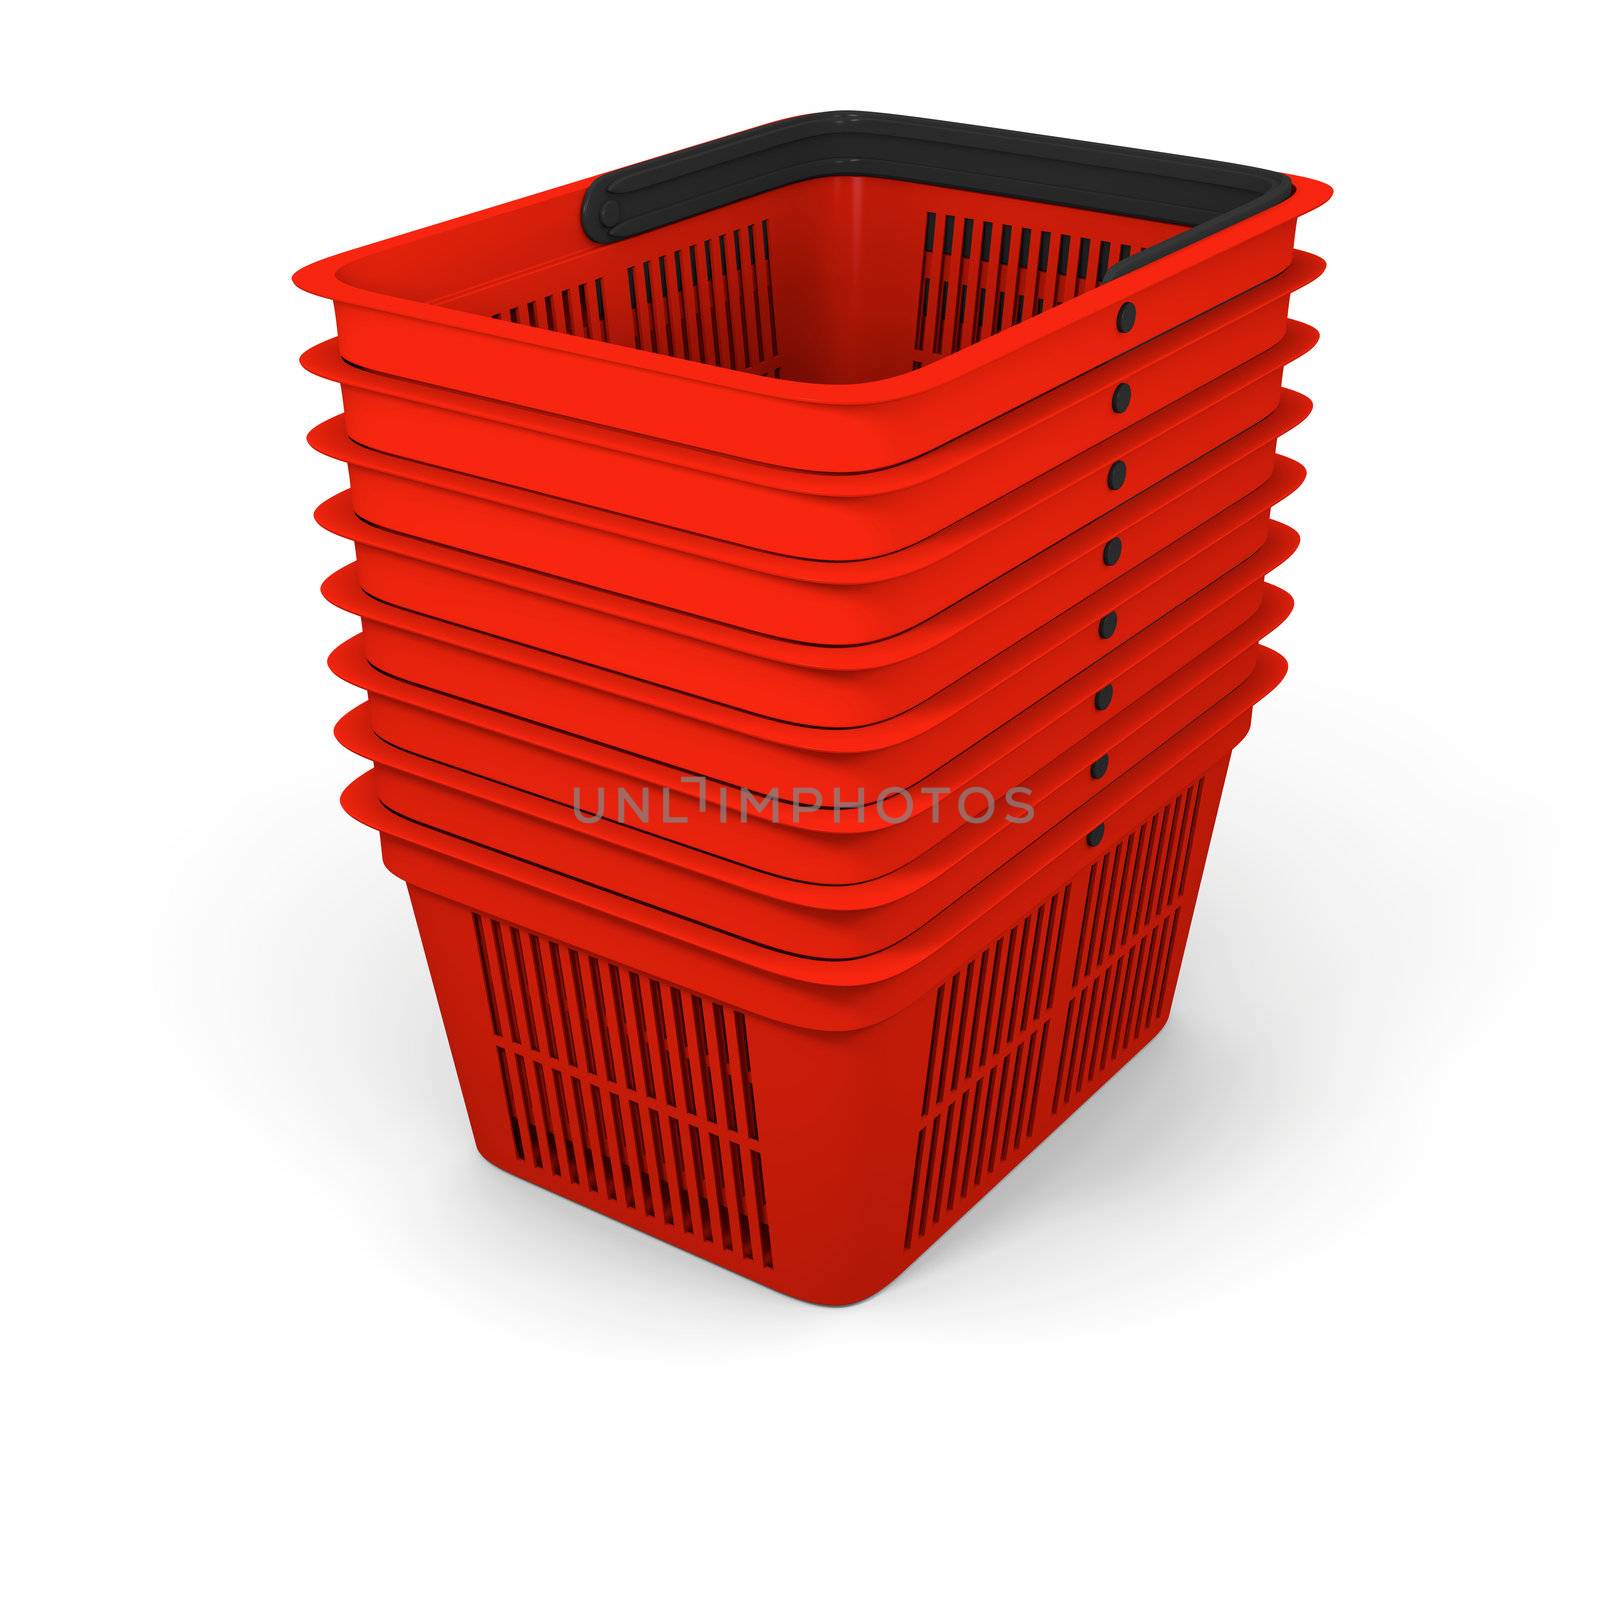 3D illustration of pile of red plastic shopping baskets